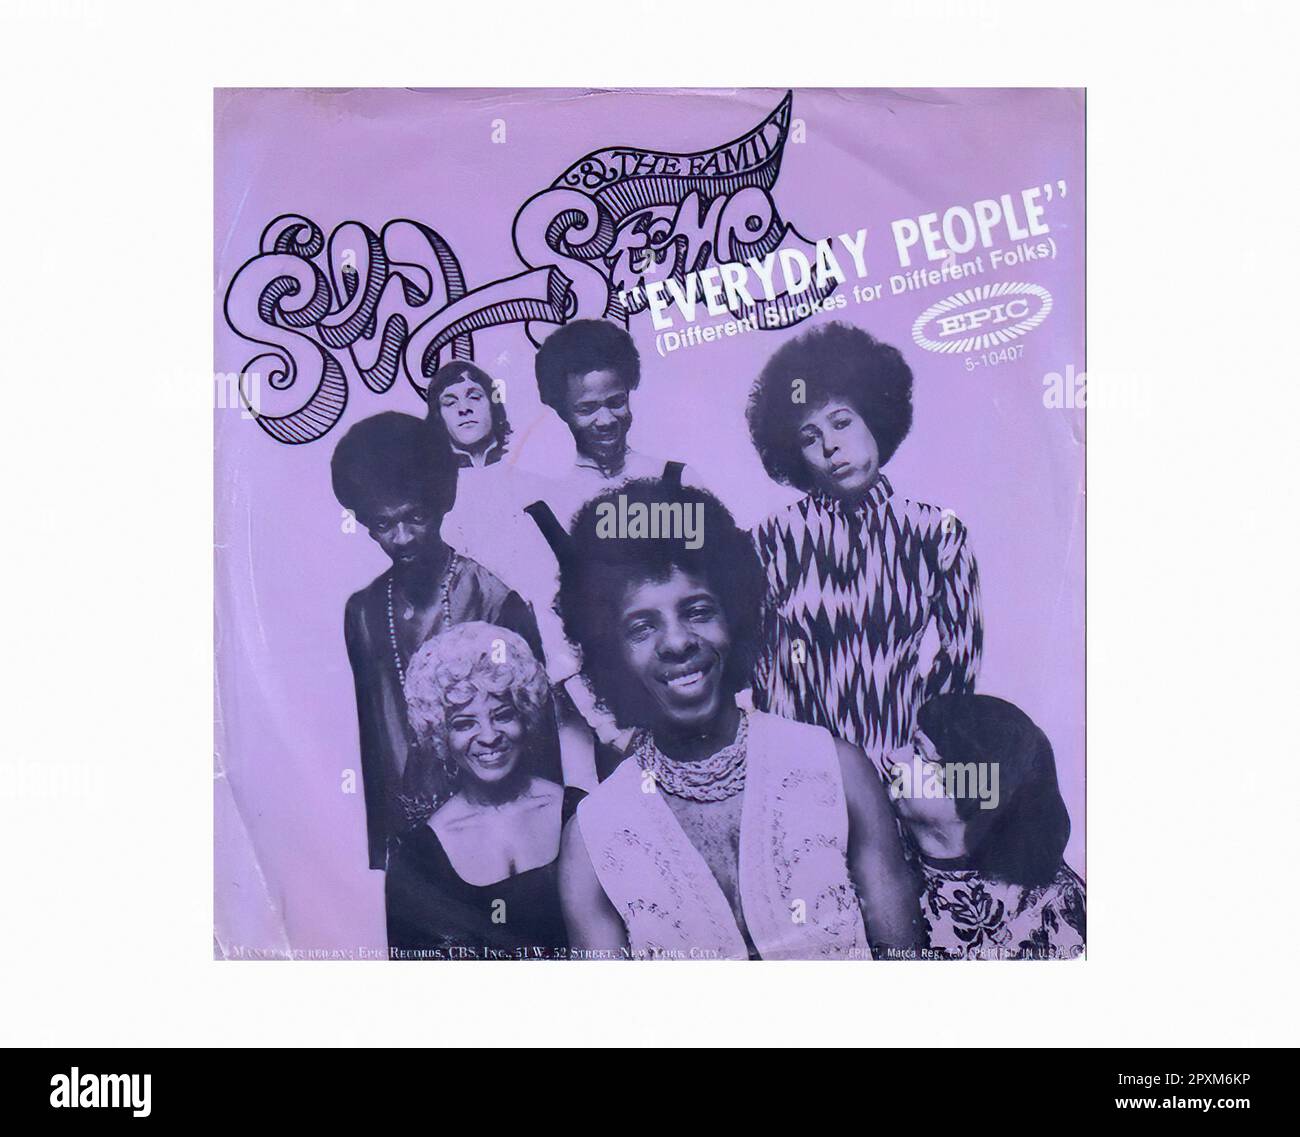 Sly & Family Stone - 1968 11 A - Vintage 45 R.P.M Music Vinyl Record Stock Photo